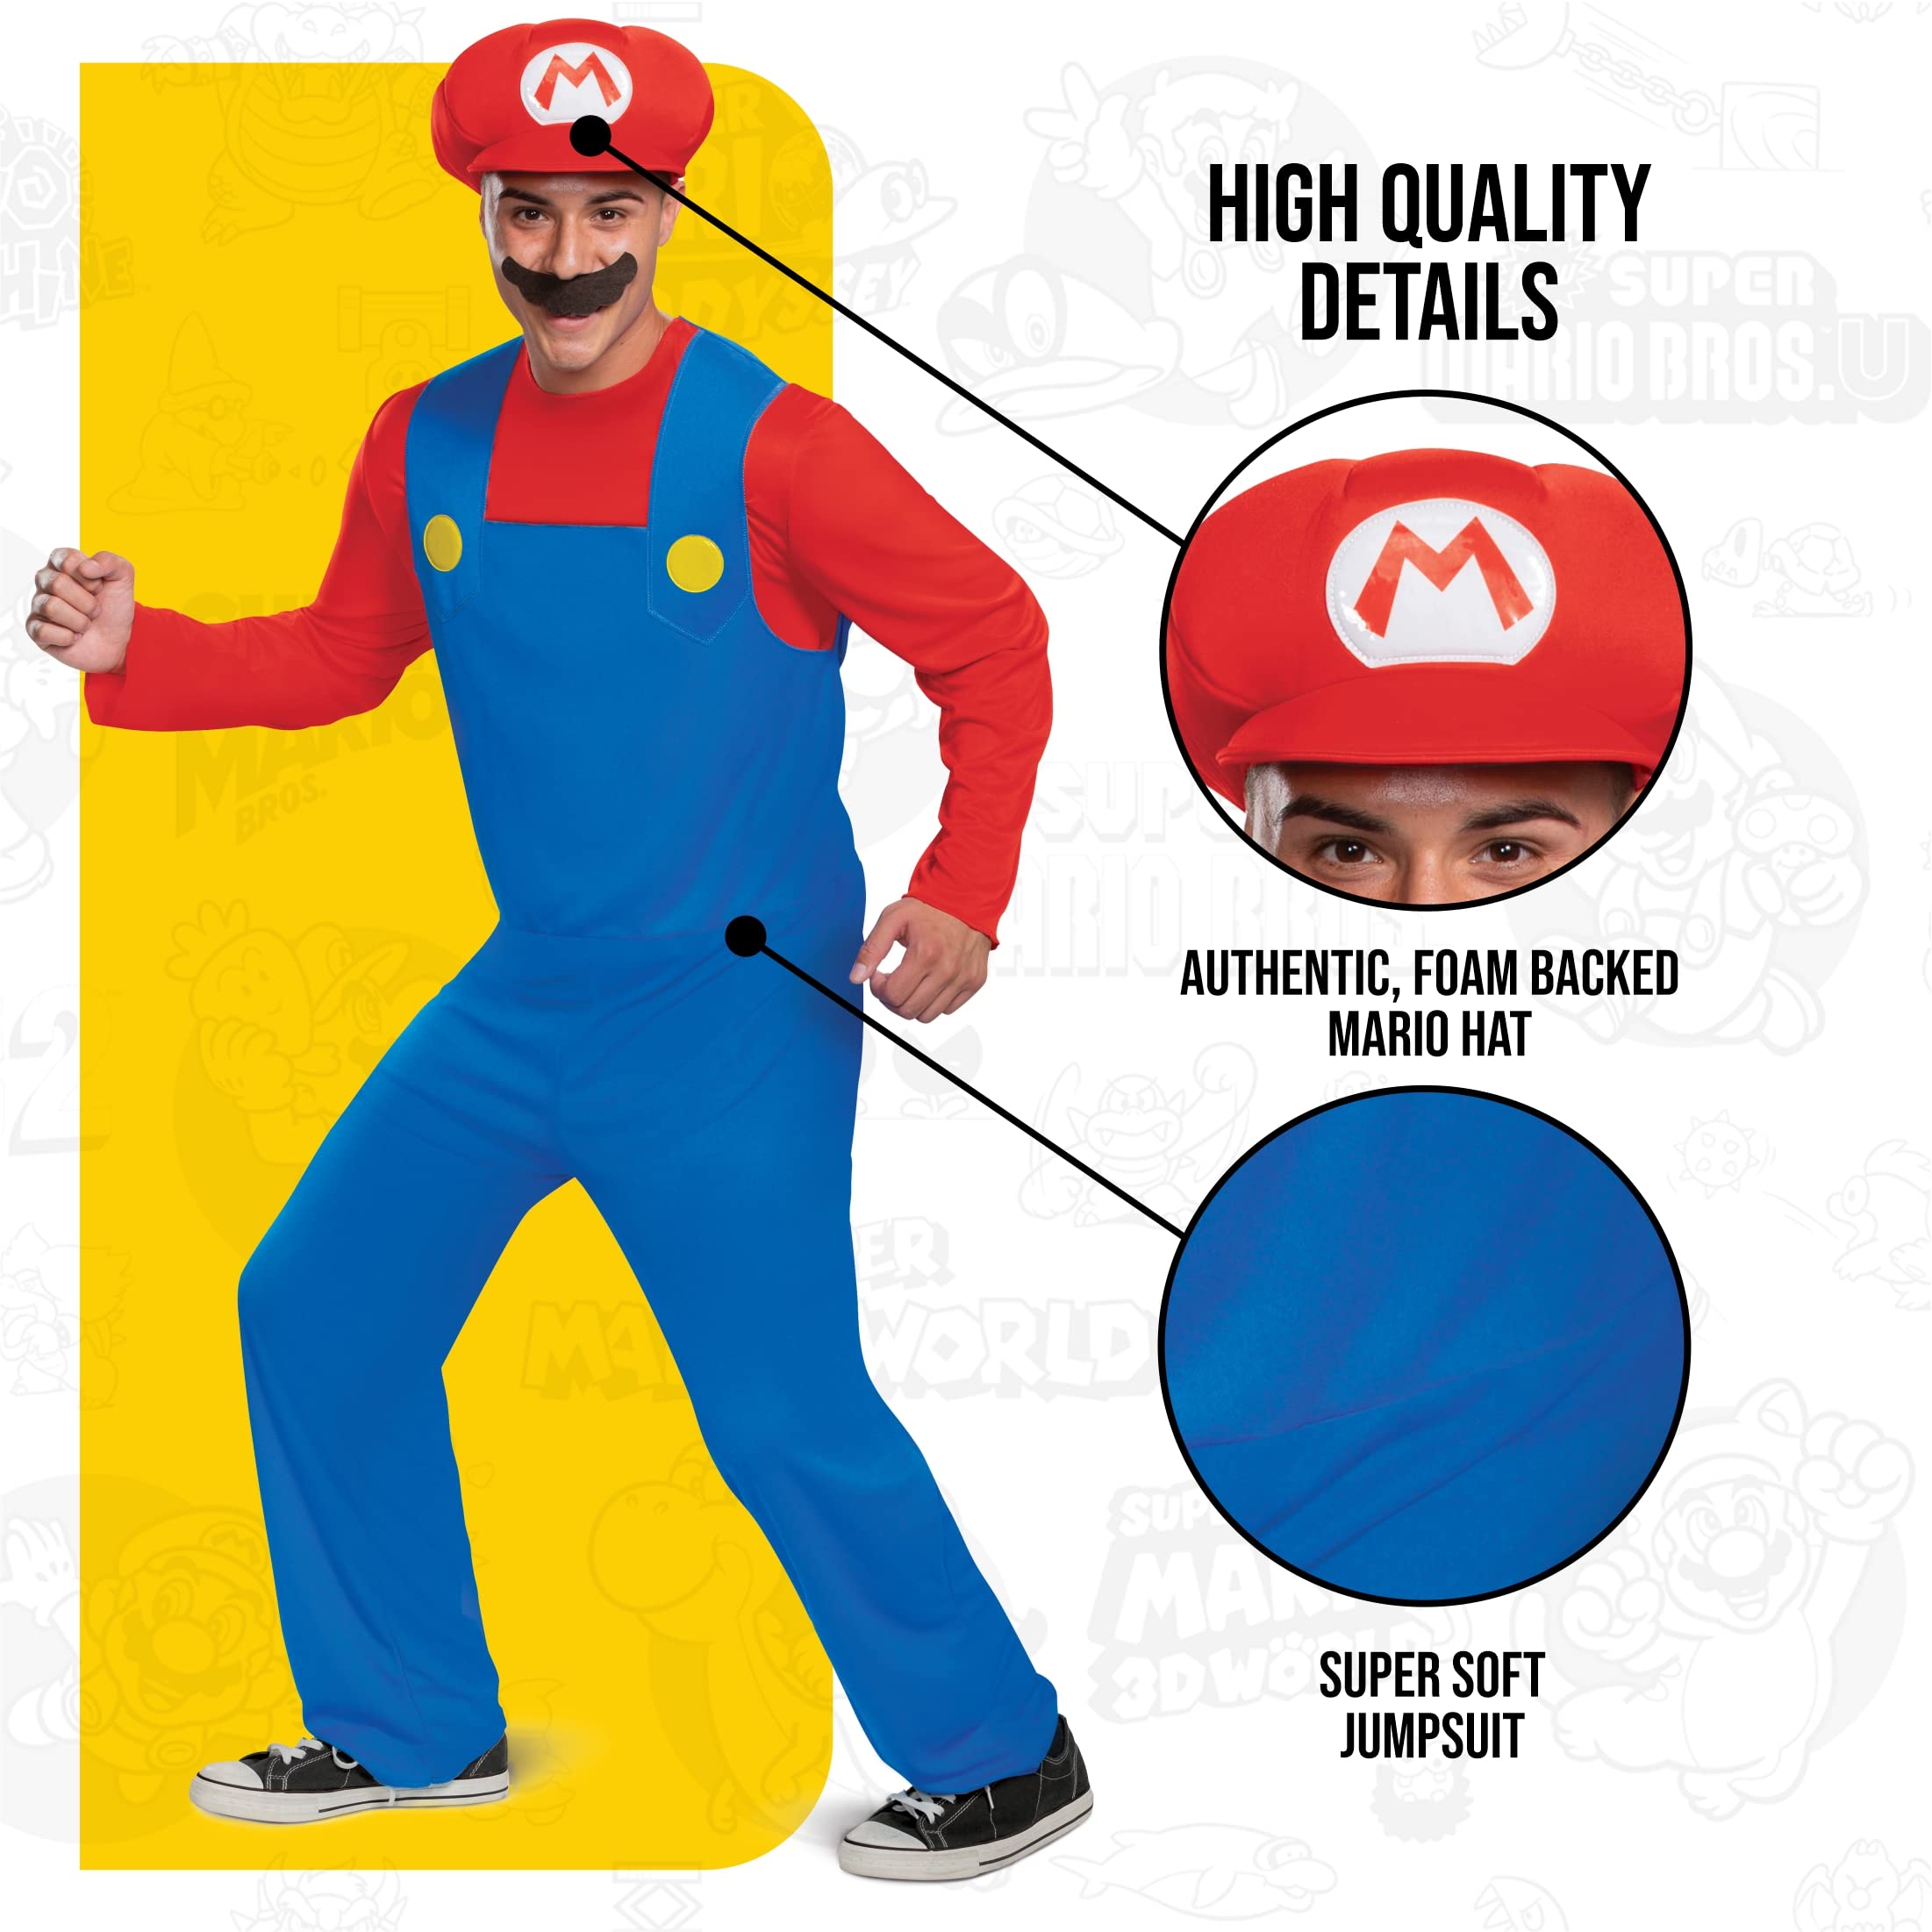 Disguise mens Mario Costume, Official Nintendo Super Mario Bros Adult Costume With Hat and Mustache